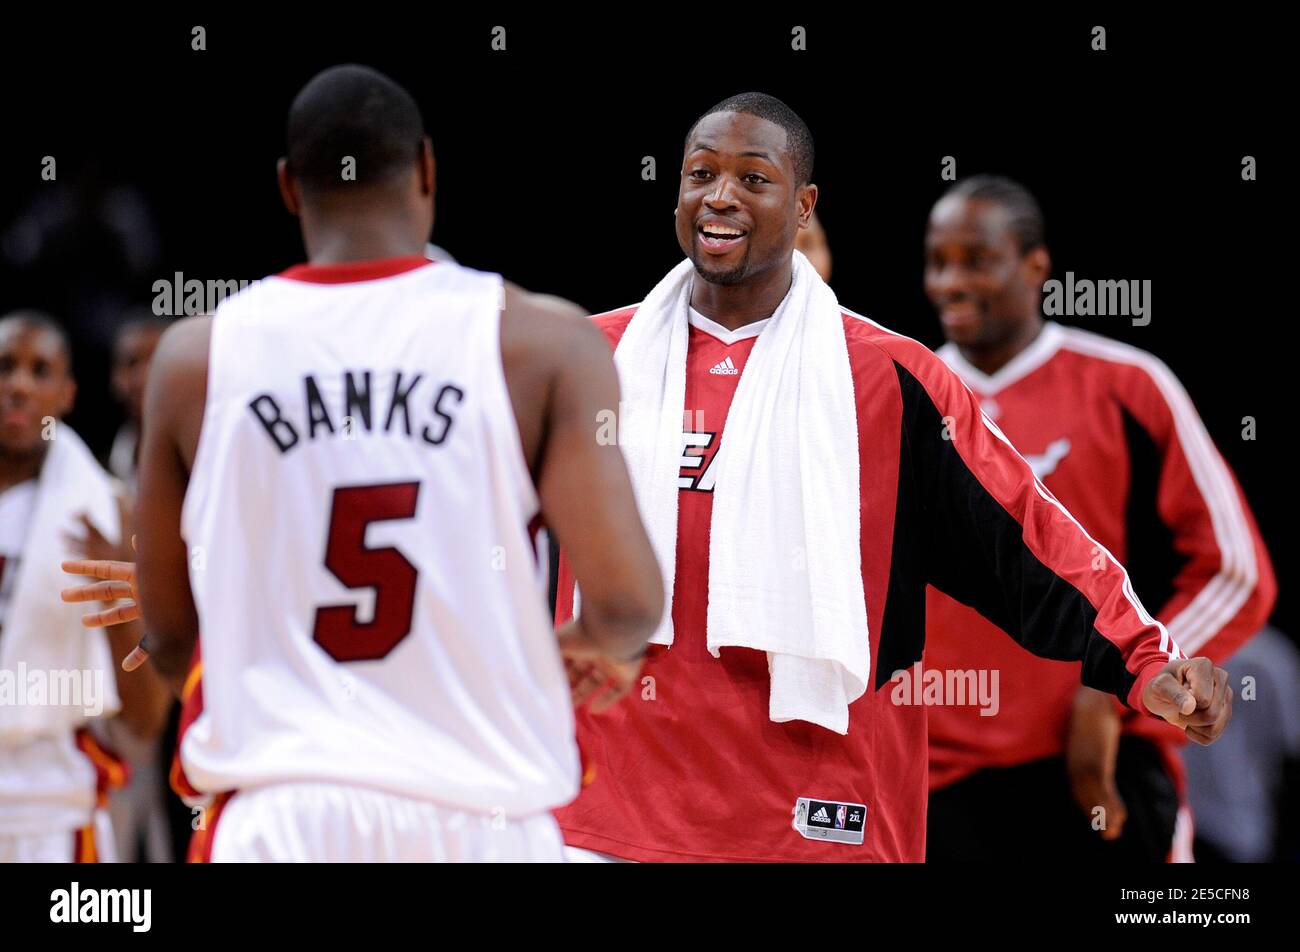 Marcus Banks and Dwyane Wade the Miami Heat during the NBA exhibition  Basketball match, New Jersey Nets vs Miami Heat at the Palais Omnisports de  Paris Bercy in Paris, FRance on October